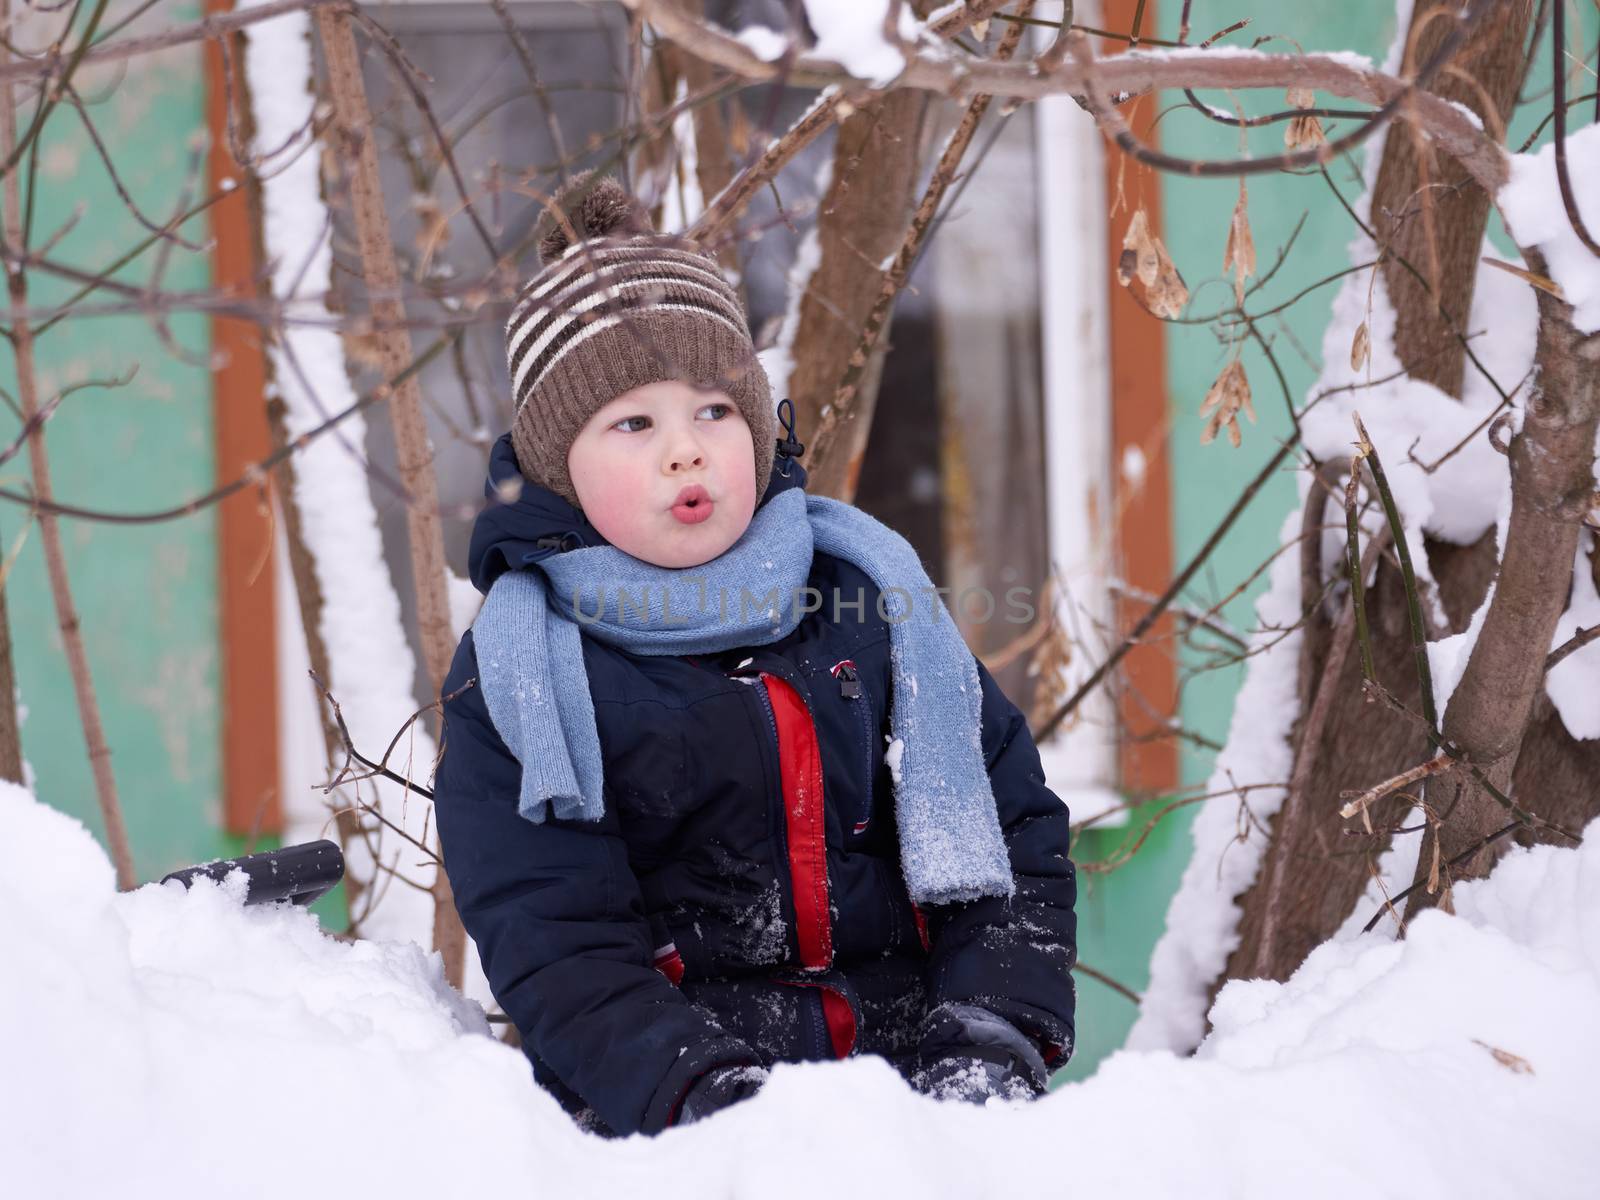 A boy in a knitted hat and with a scarf in winter plays in the snow. by vladali